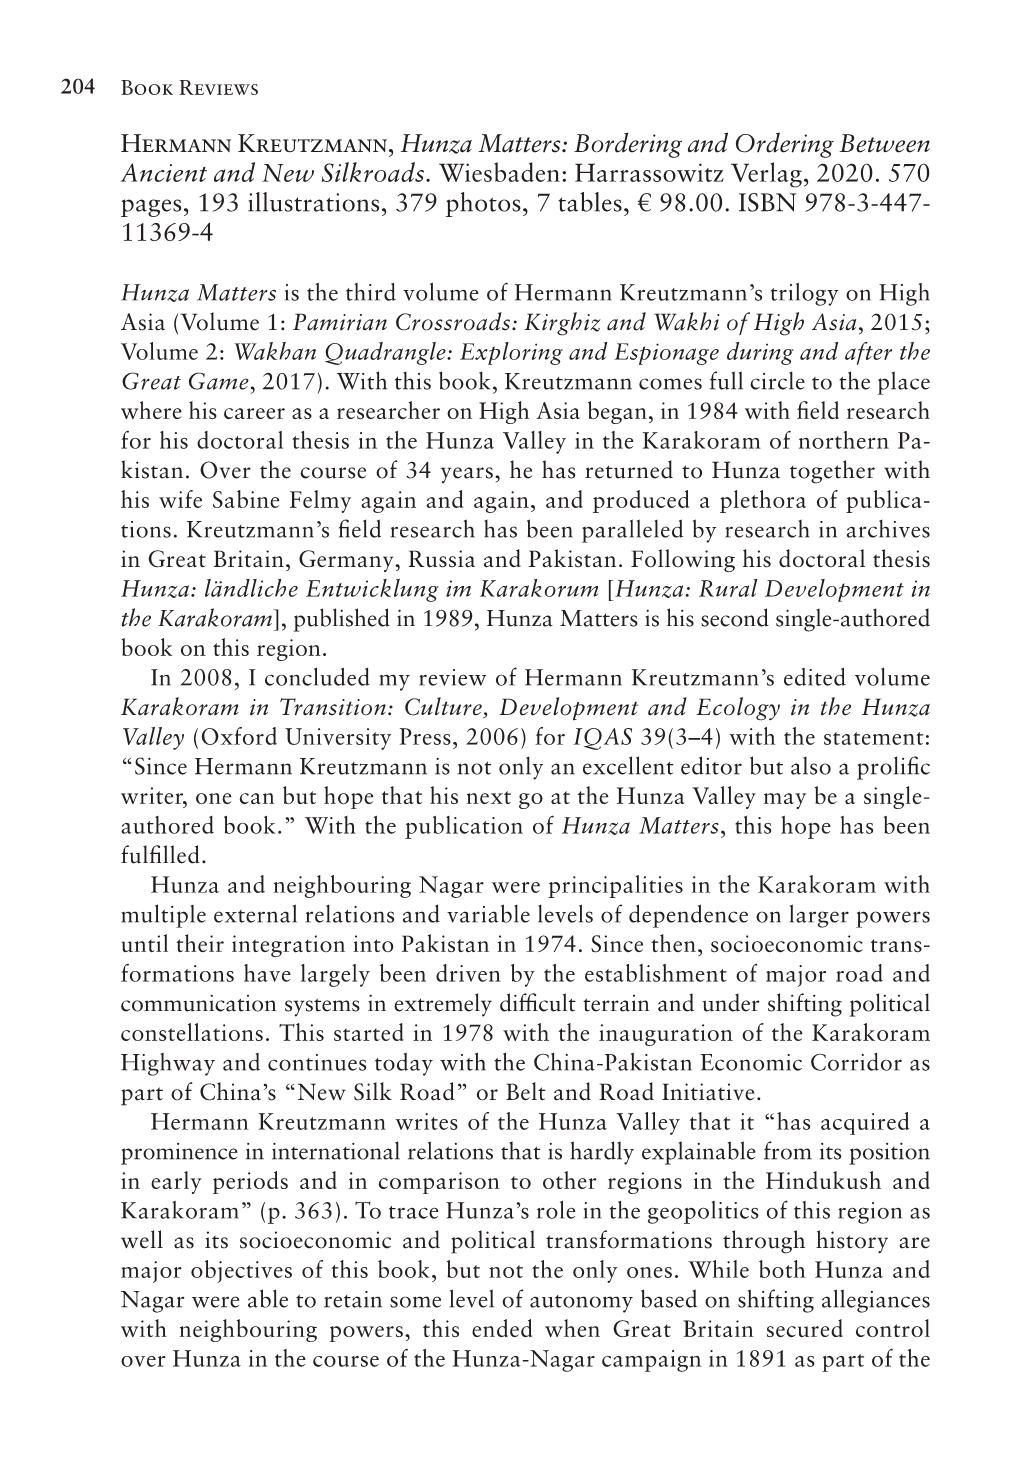 Hermann Kreutzmann, Hunza Matters: Bordering and Ordering Between Ancient and New Silkroads